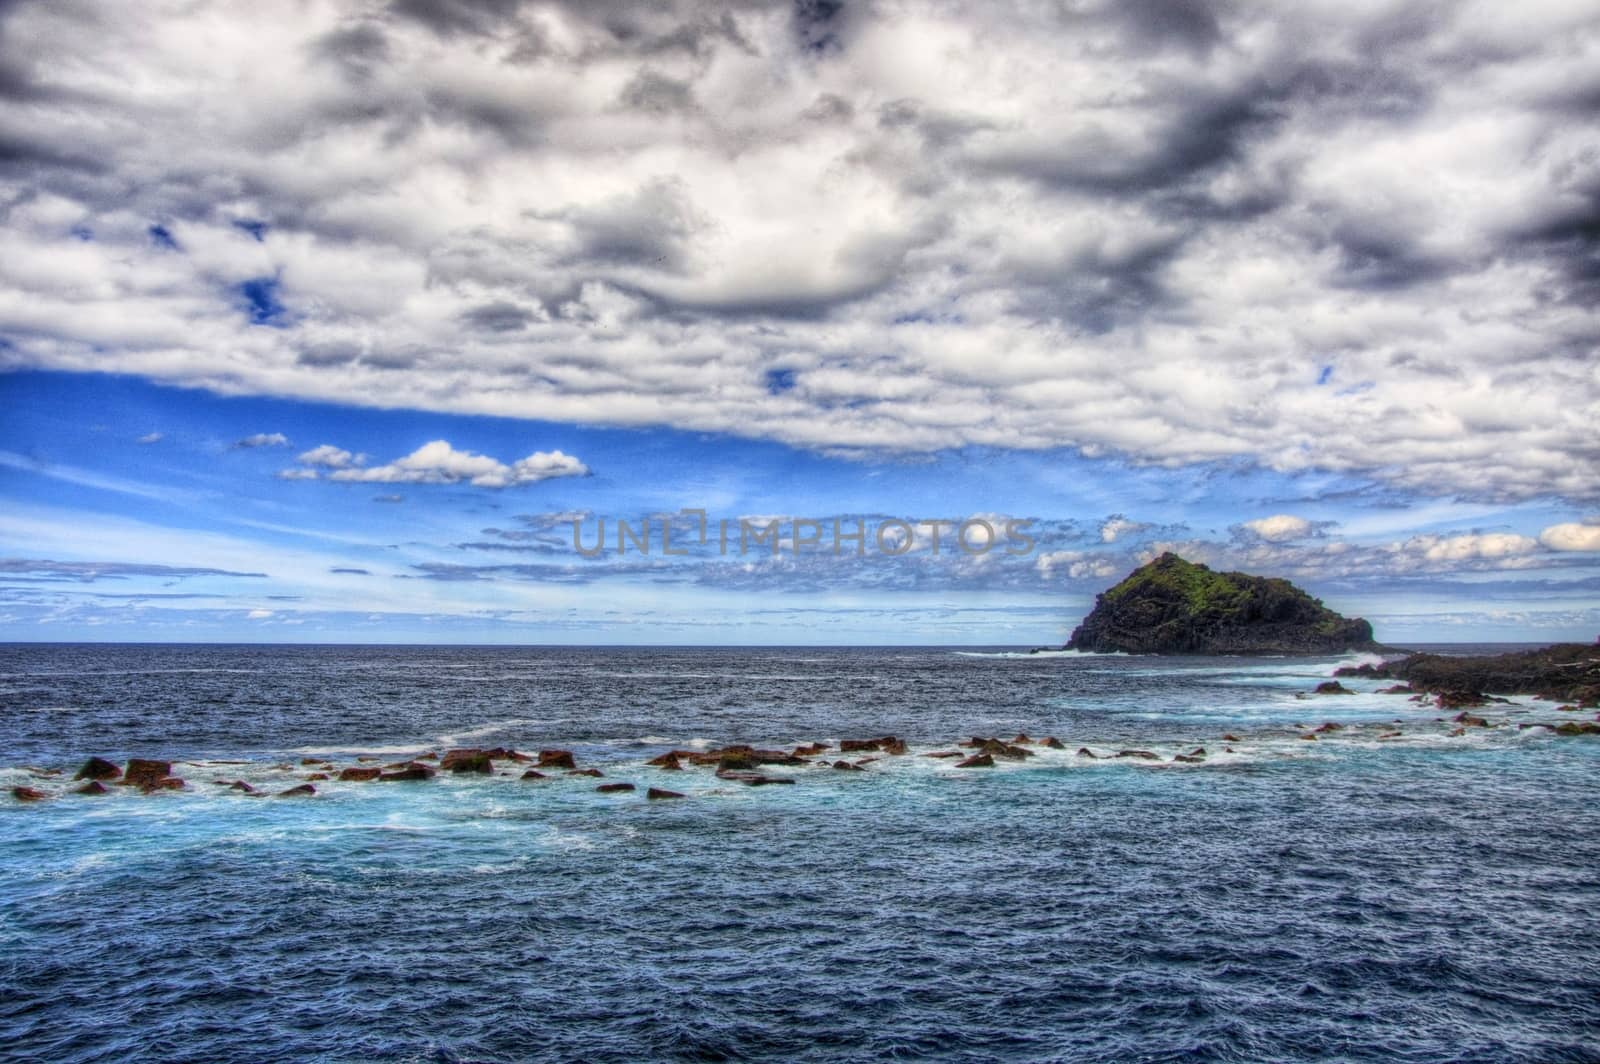 North-west coast of Tenerife, Canarian Islands by Eagle2308